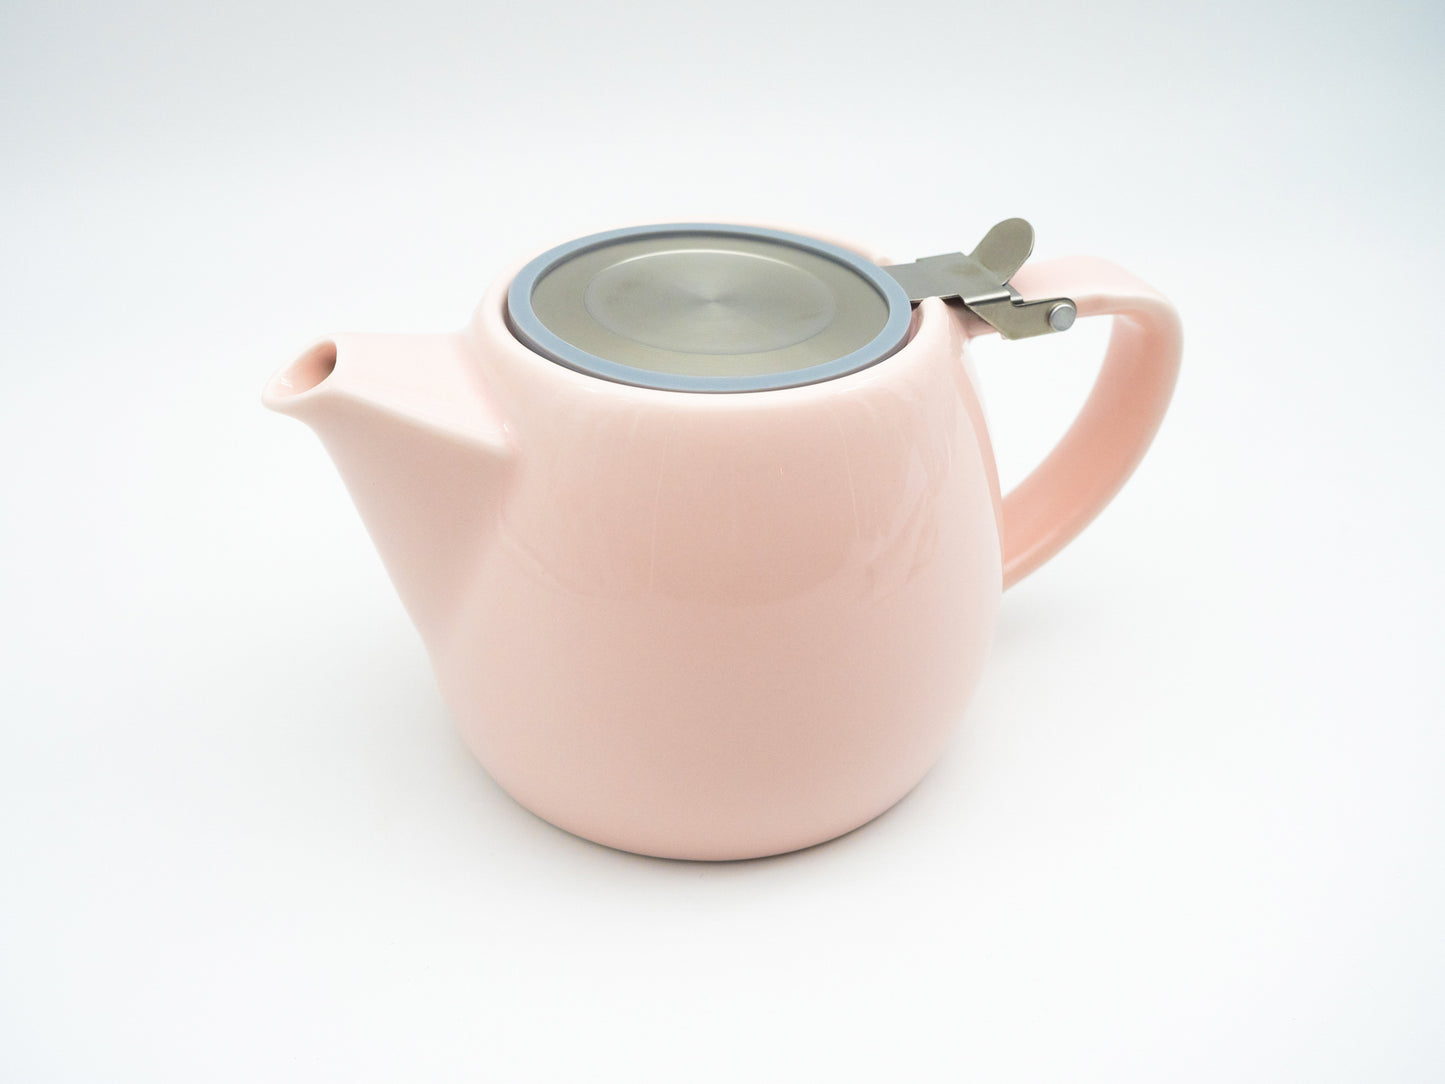 Light pink porcelain tea pot with stainless steel lid and infuser basket